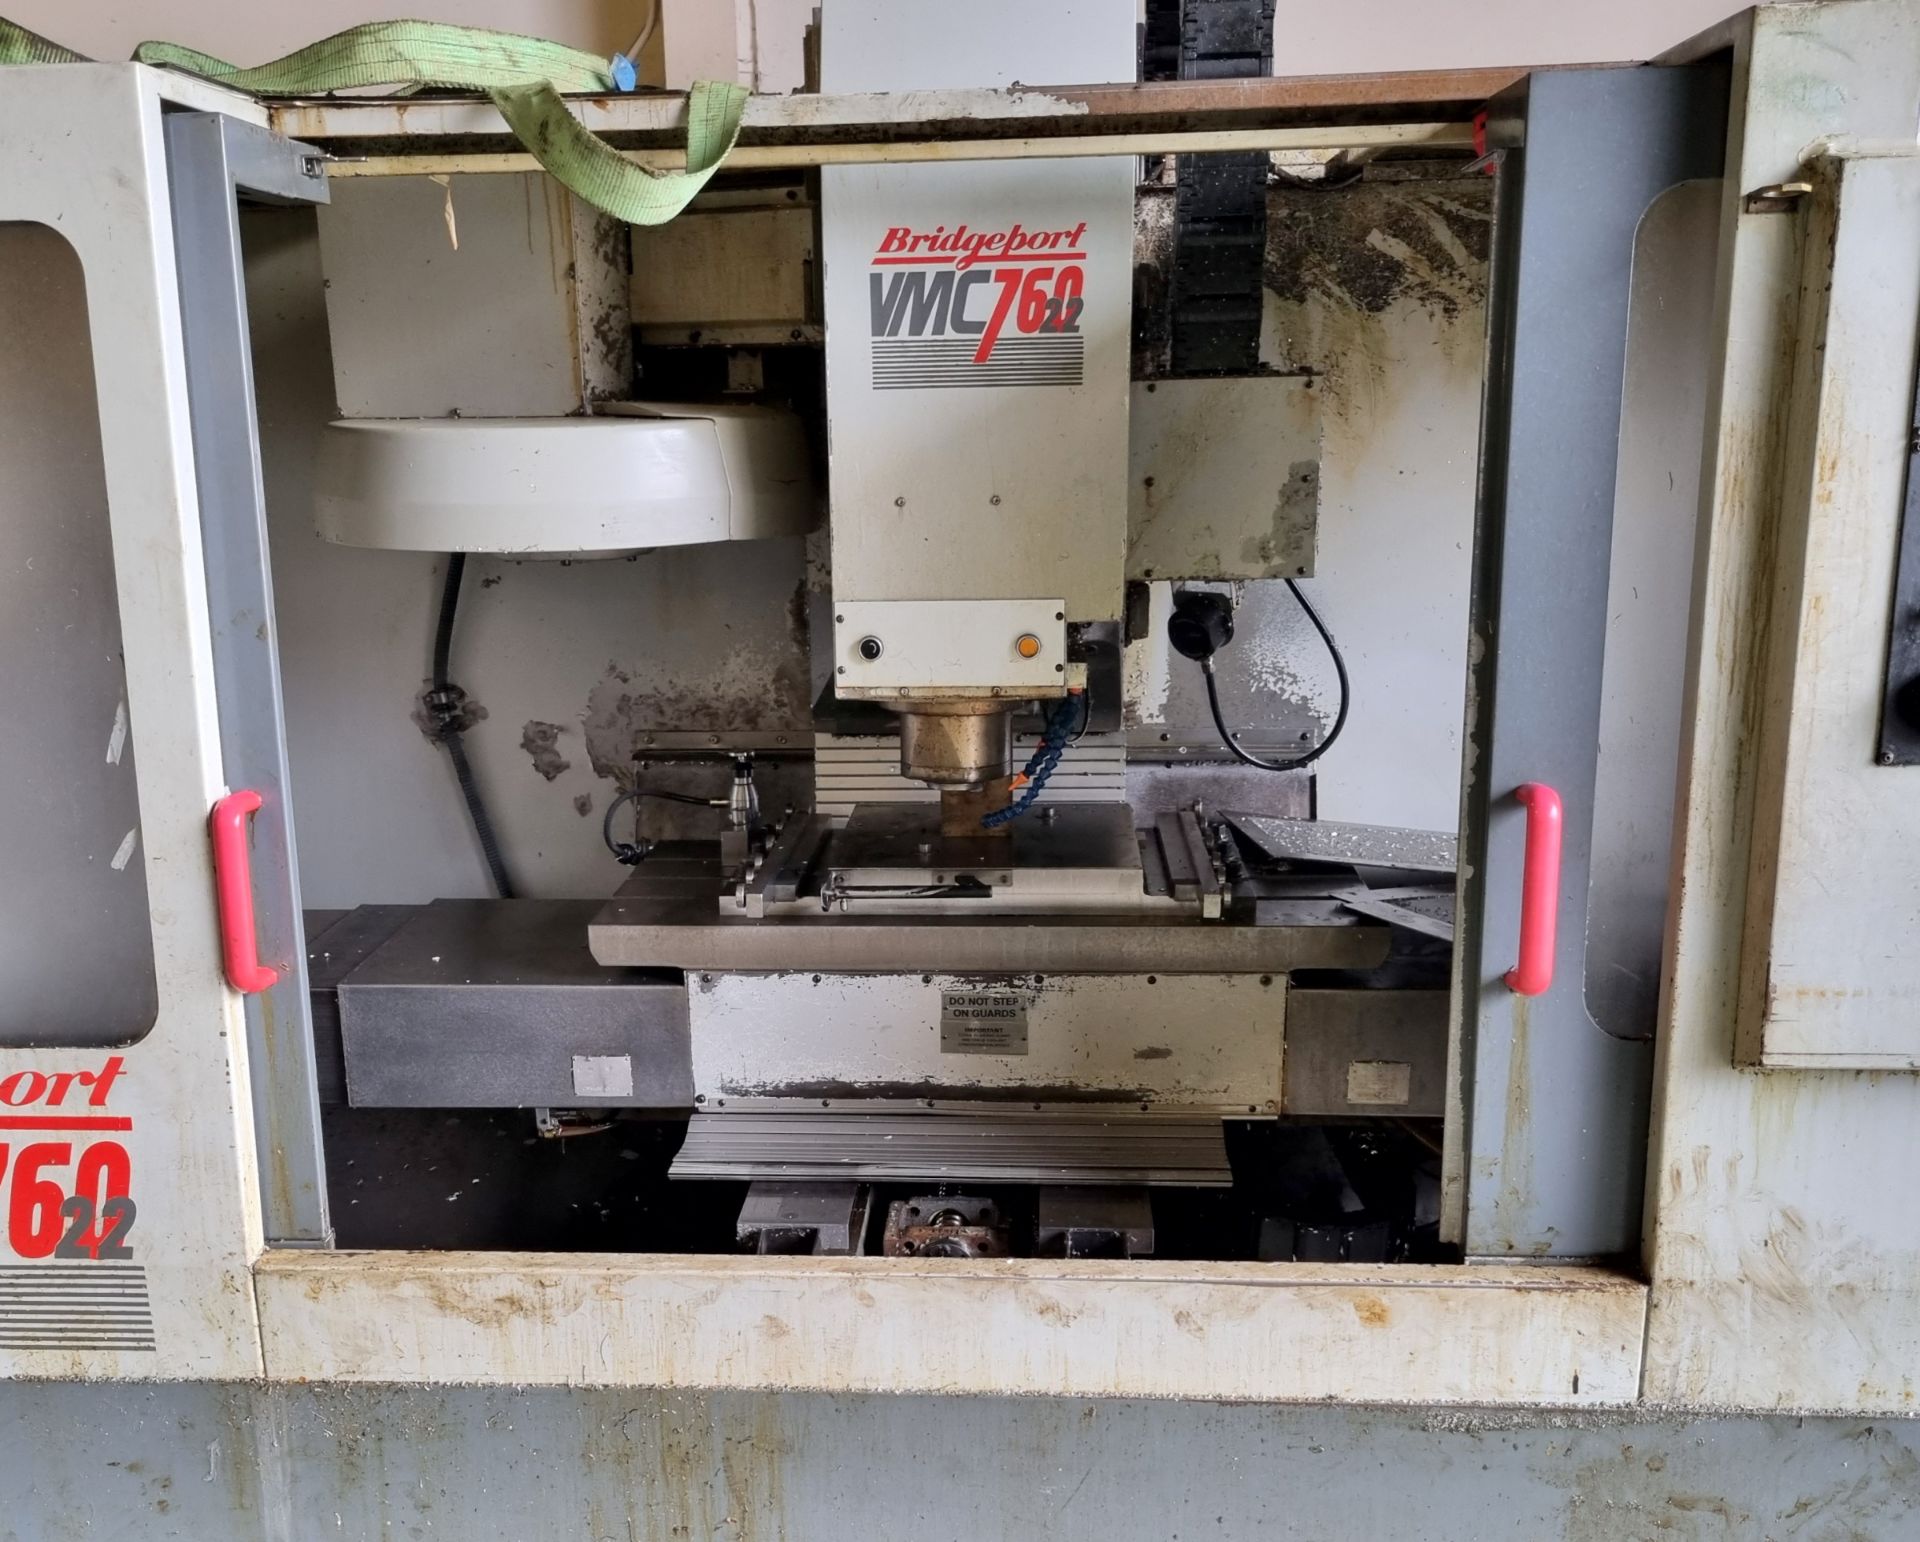 Bridgeport VMC 760 CNC vertical machining centre with work bench and swarf skip - Serial No: 20363 - Image 12 of 27